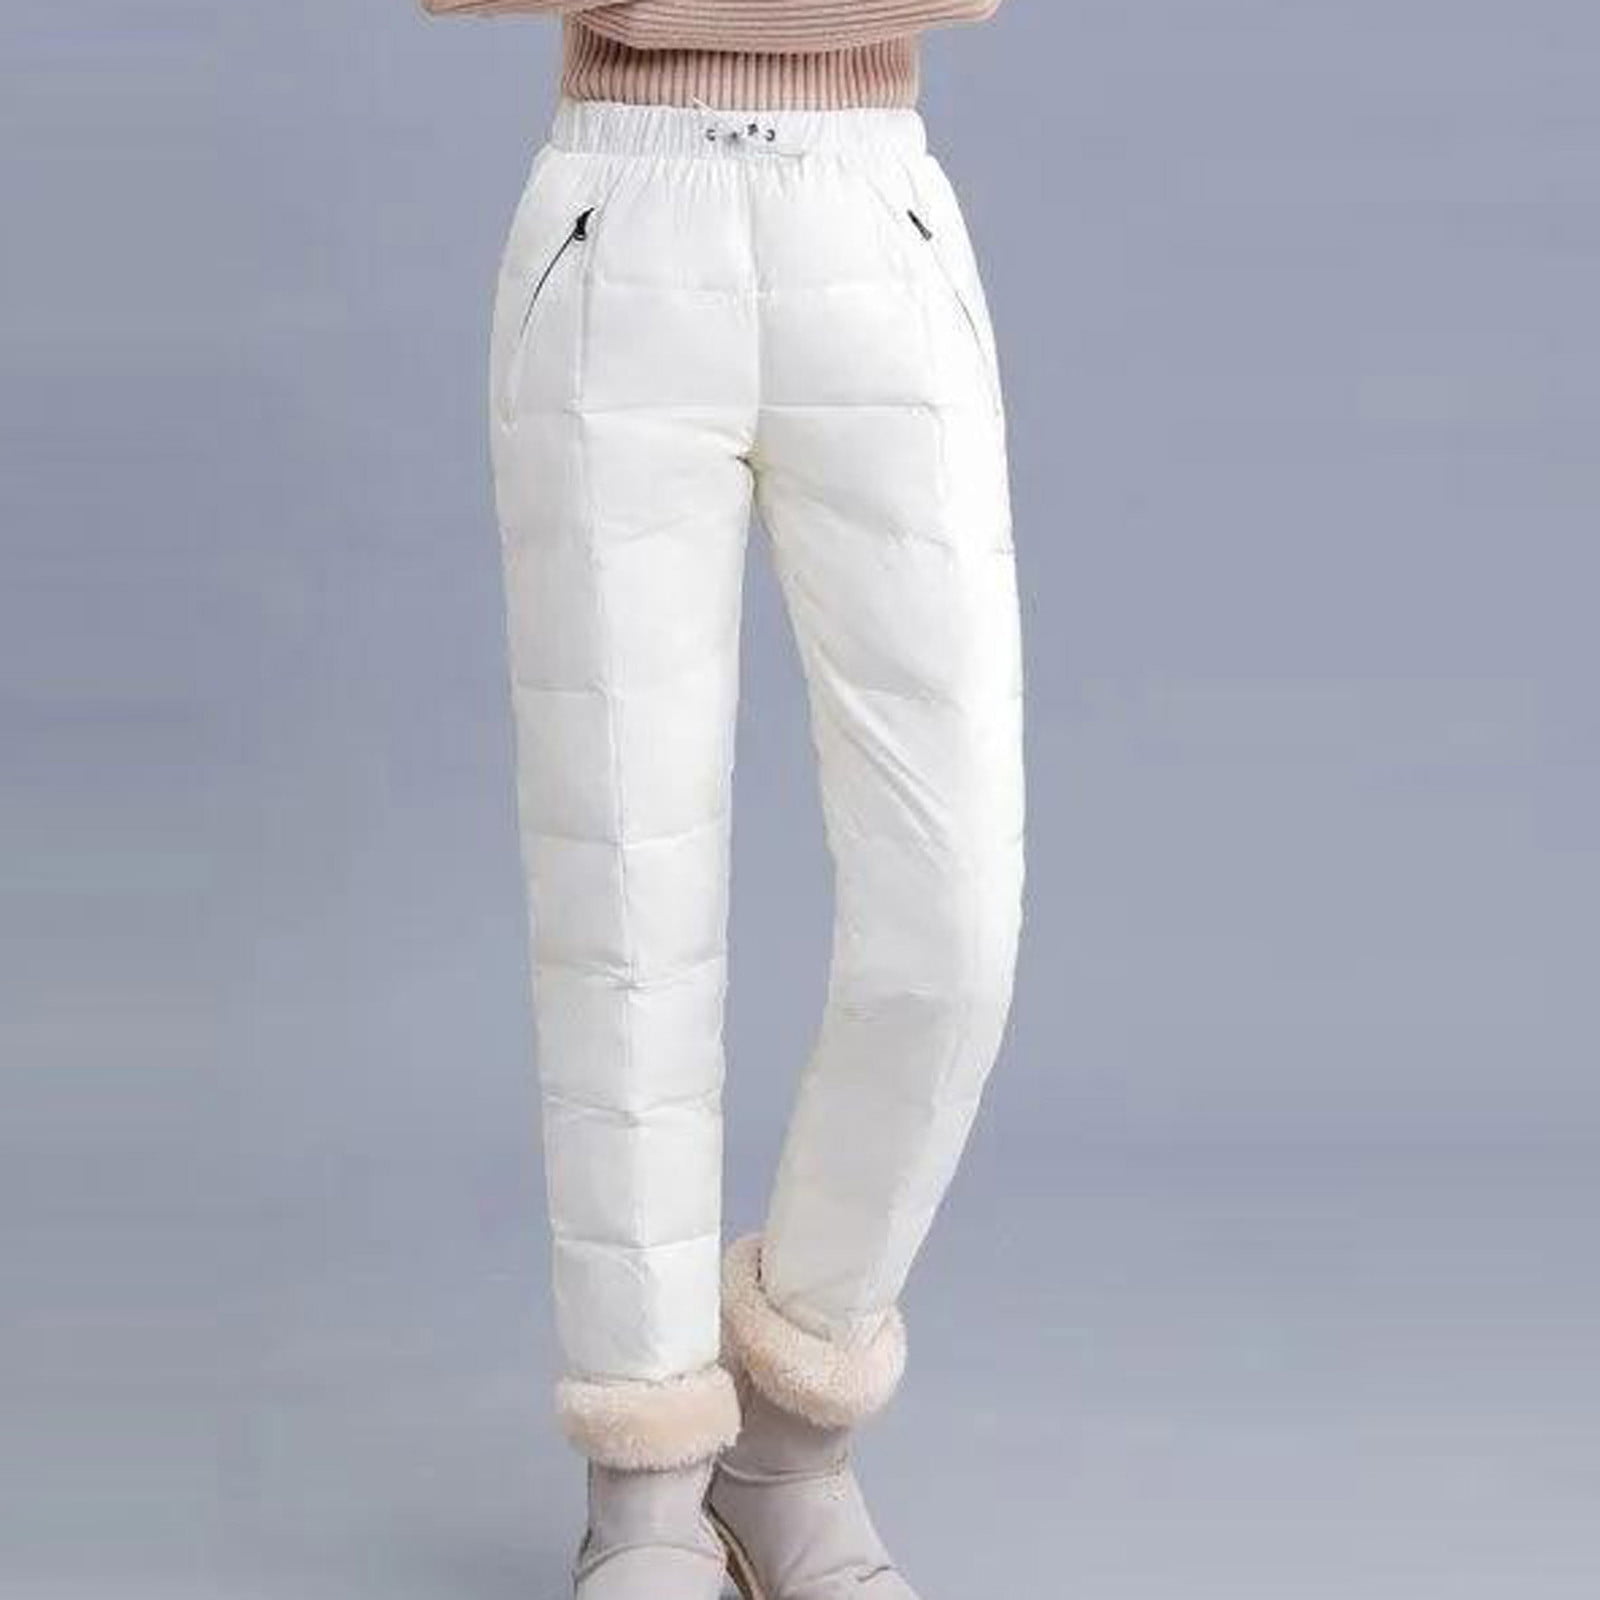 Women Winter High Waist Warm Double-sided Down Cotton Pants Slim Quilted Trouser 